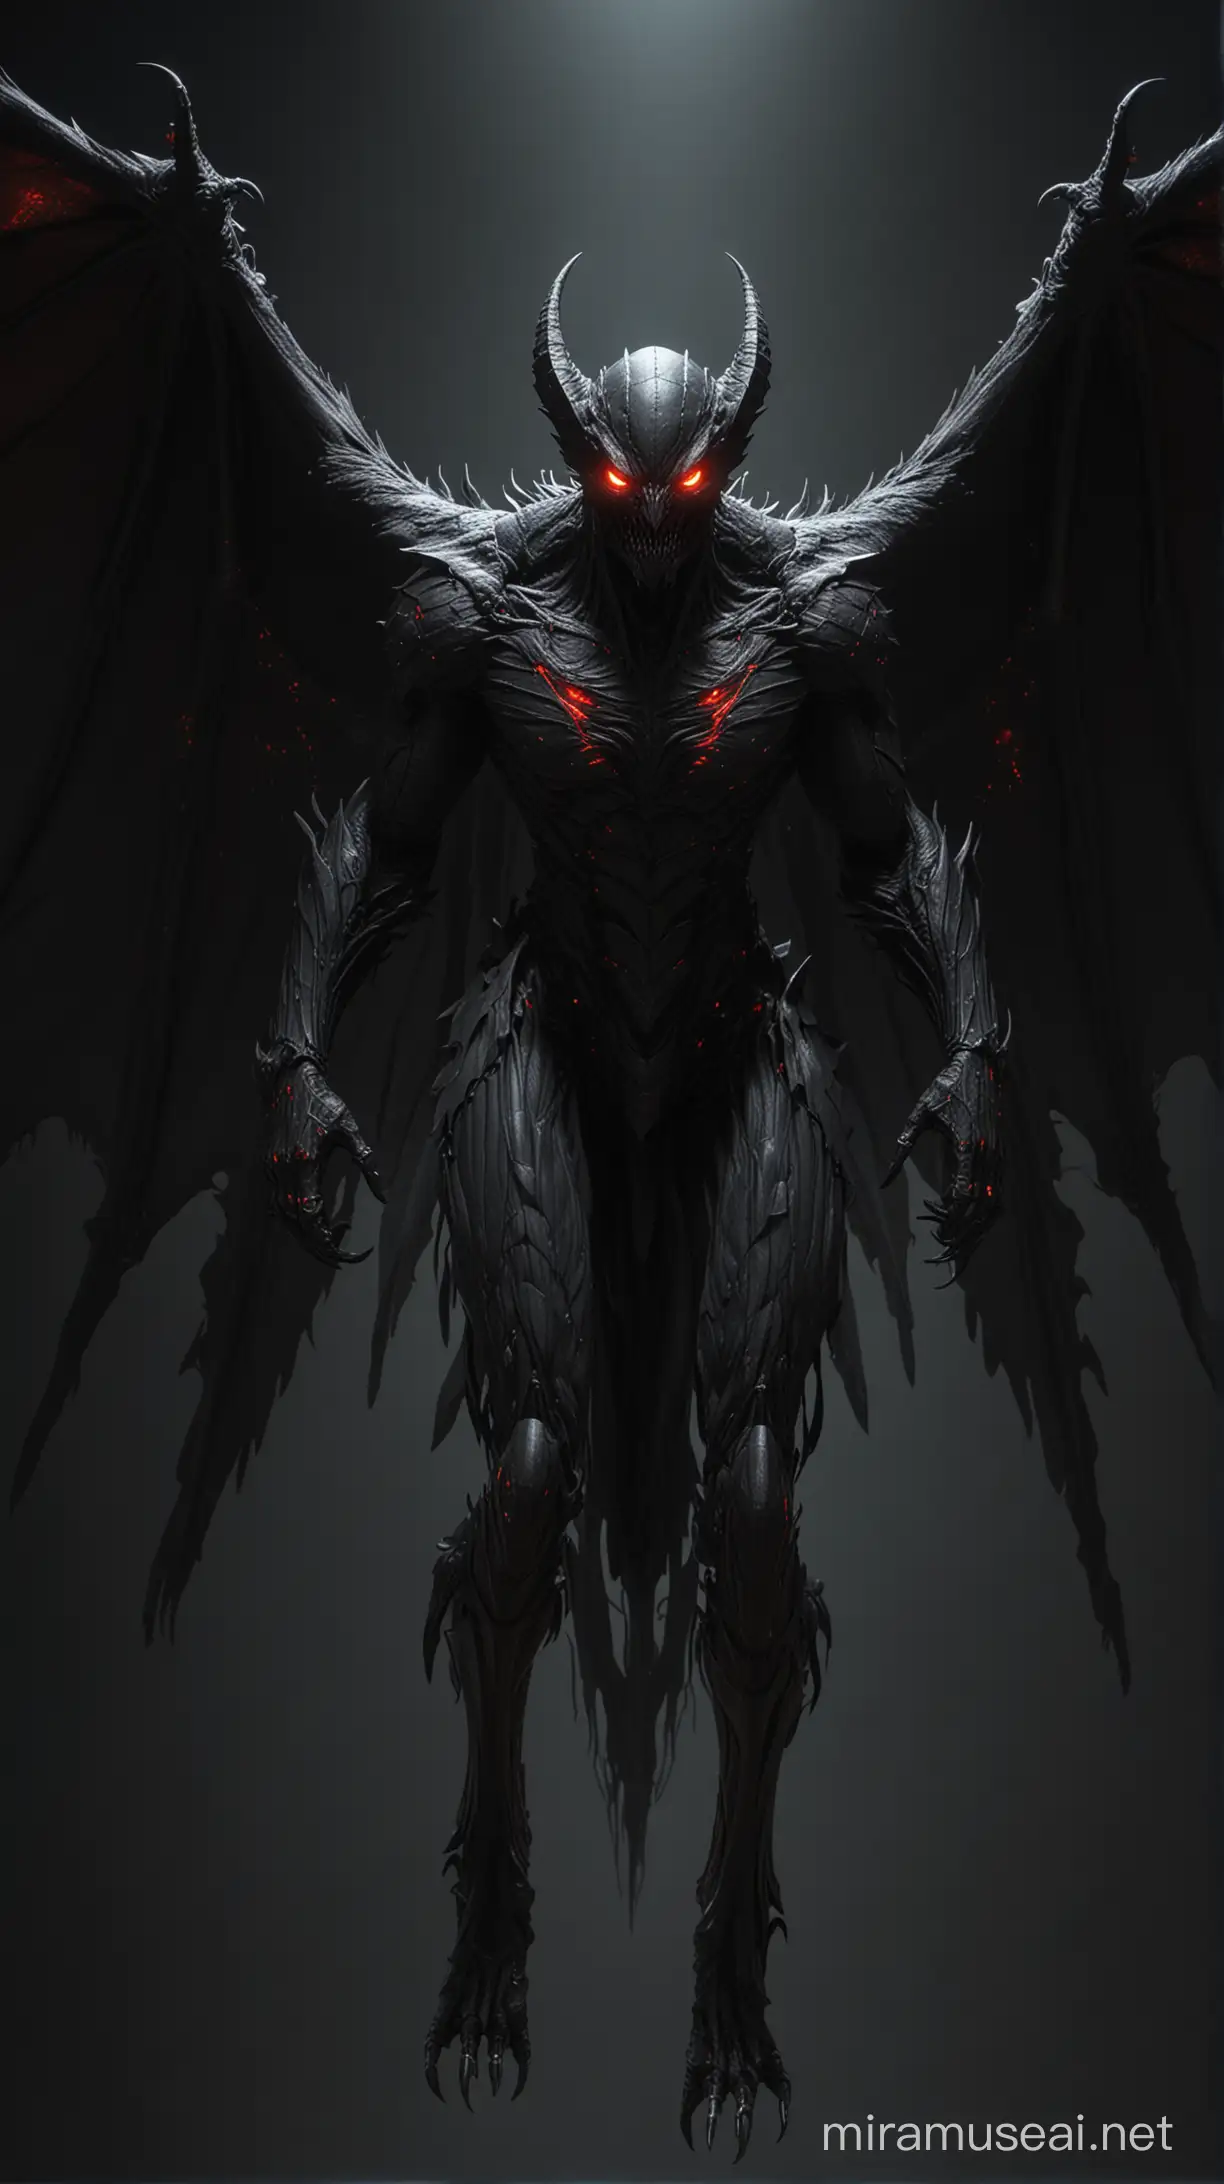 Sinister BatWinged Insectoid Monster in HighResolution Art